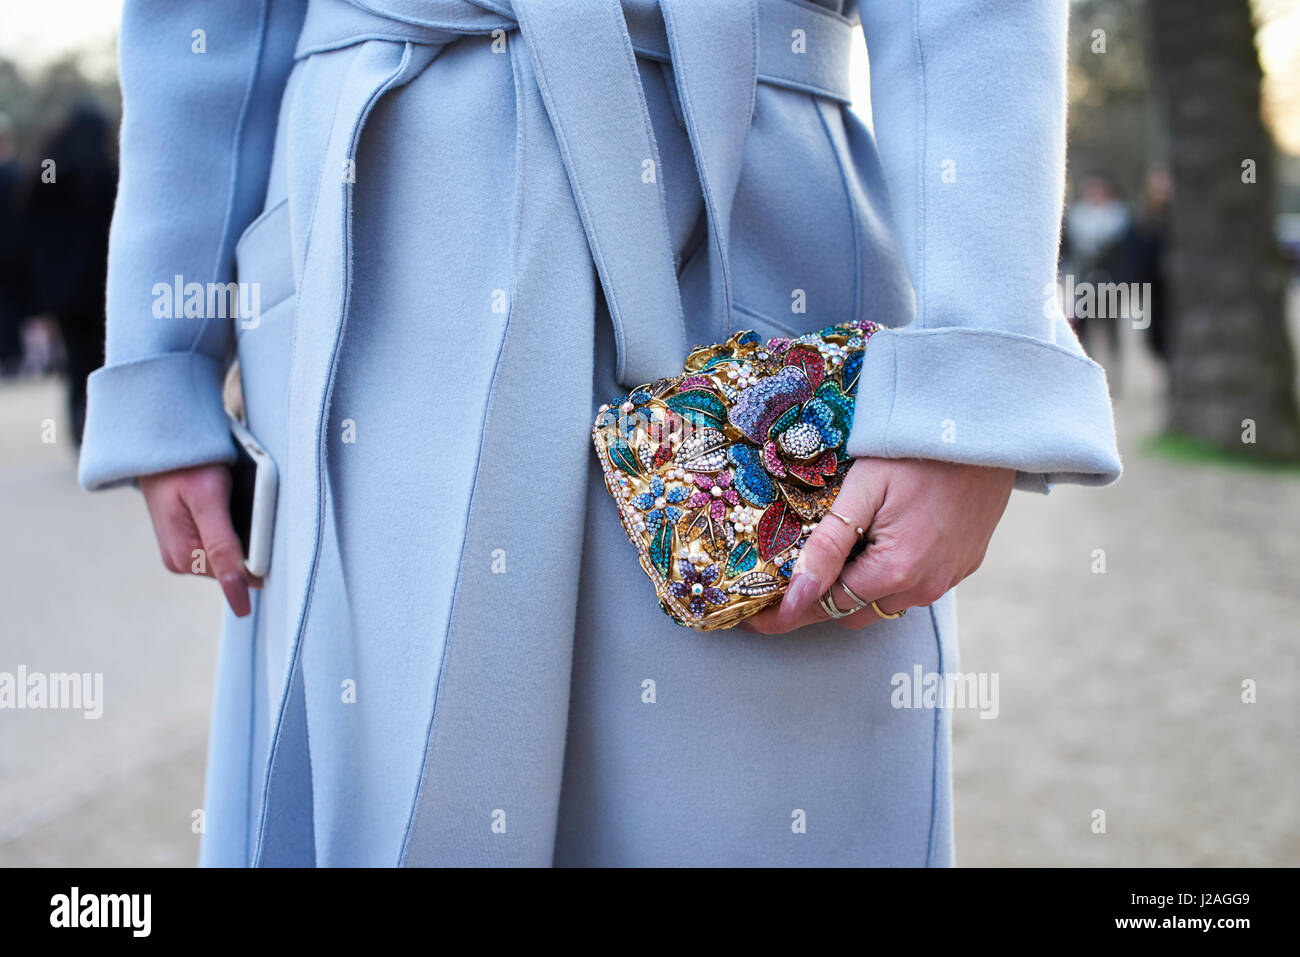 LONDON - FEBRUARY, 2017: Mid section of woman dressed in pale blue wool coat holding smartphone and small appliqué decorated purse in the street during London Fashion Week, horizontal, front view Stock Photo